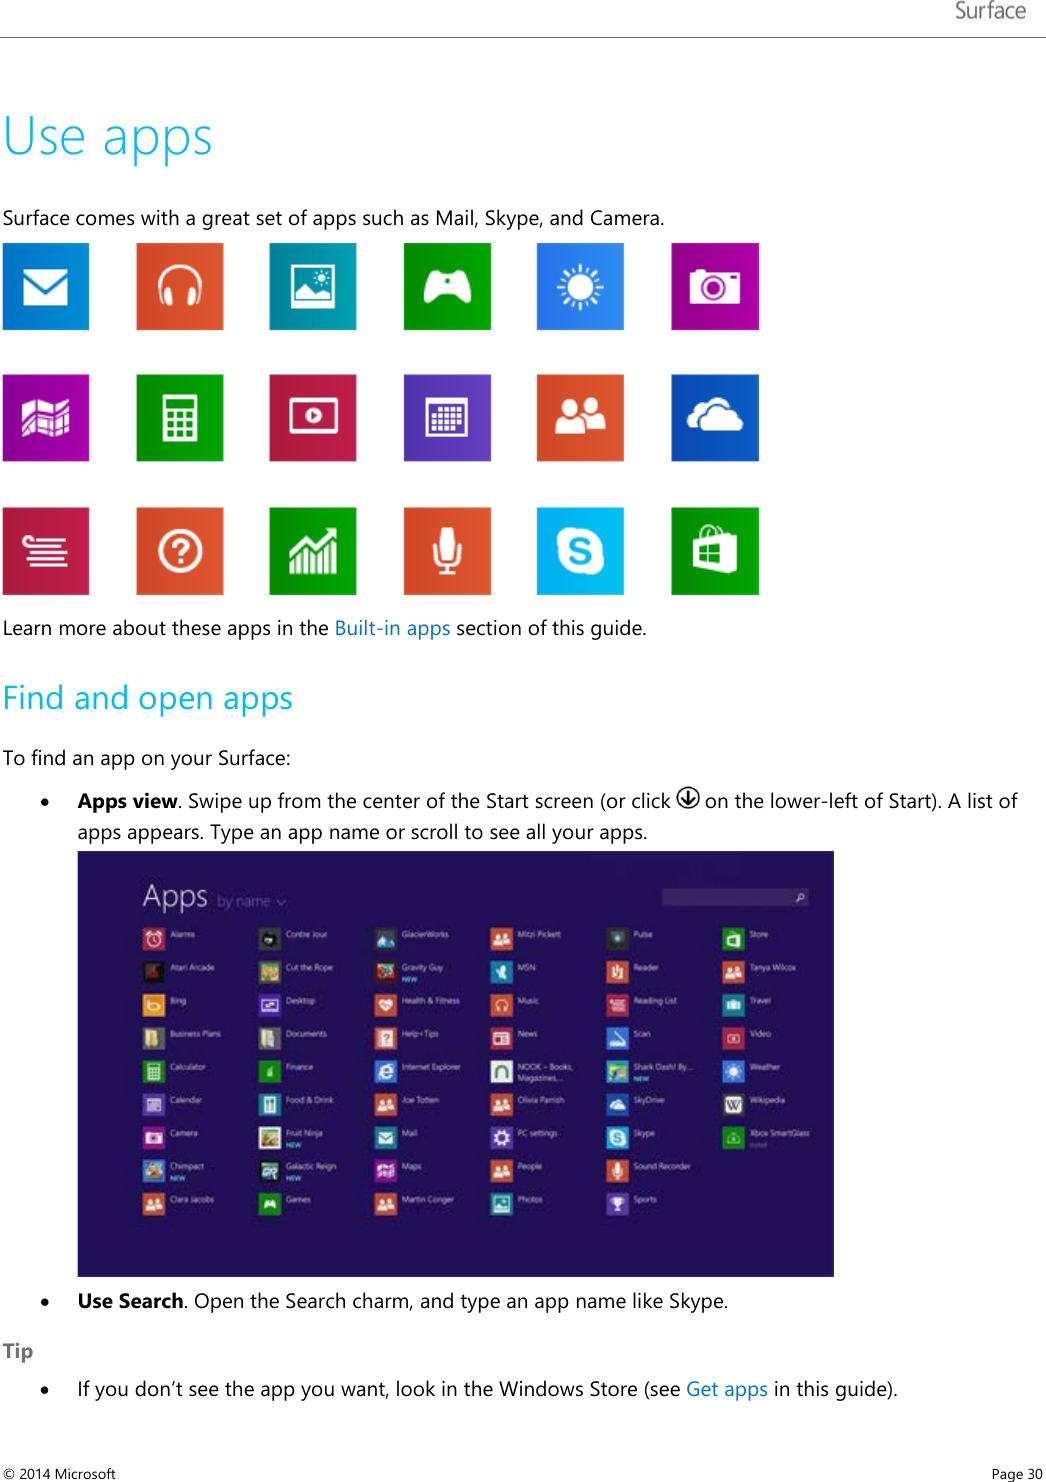   Use apps Surface comes with a great set of apps such as Mail, Skype, and Camera.  Learn more about these apps in the Built-in apps section of this guide. Find and open apps To find an app on your Surface: • Apps view. Swipe up from the center of the Start screen (or click   on the lower-left of Start). A list of apps appears. Type an app name or scroll to see all your apps.  • Use Search. Open the Search charm, and type an app name like Skype. Tip • If you don’t see the app you want, look in the Windows Store (see Get apps in this guide). © 2014 Microsoft     Page 30  